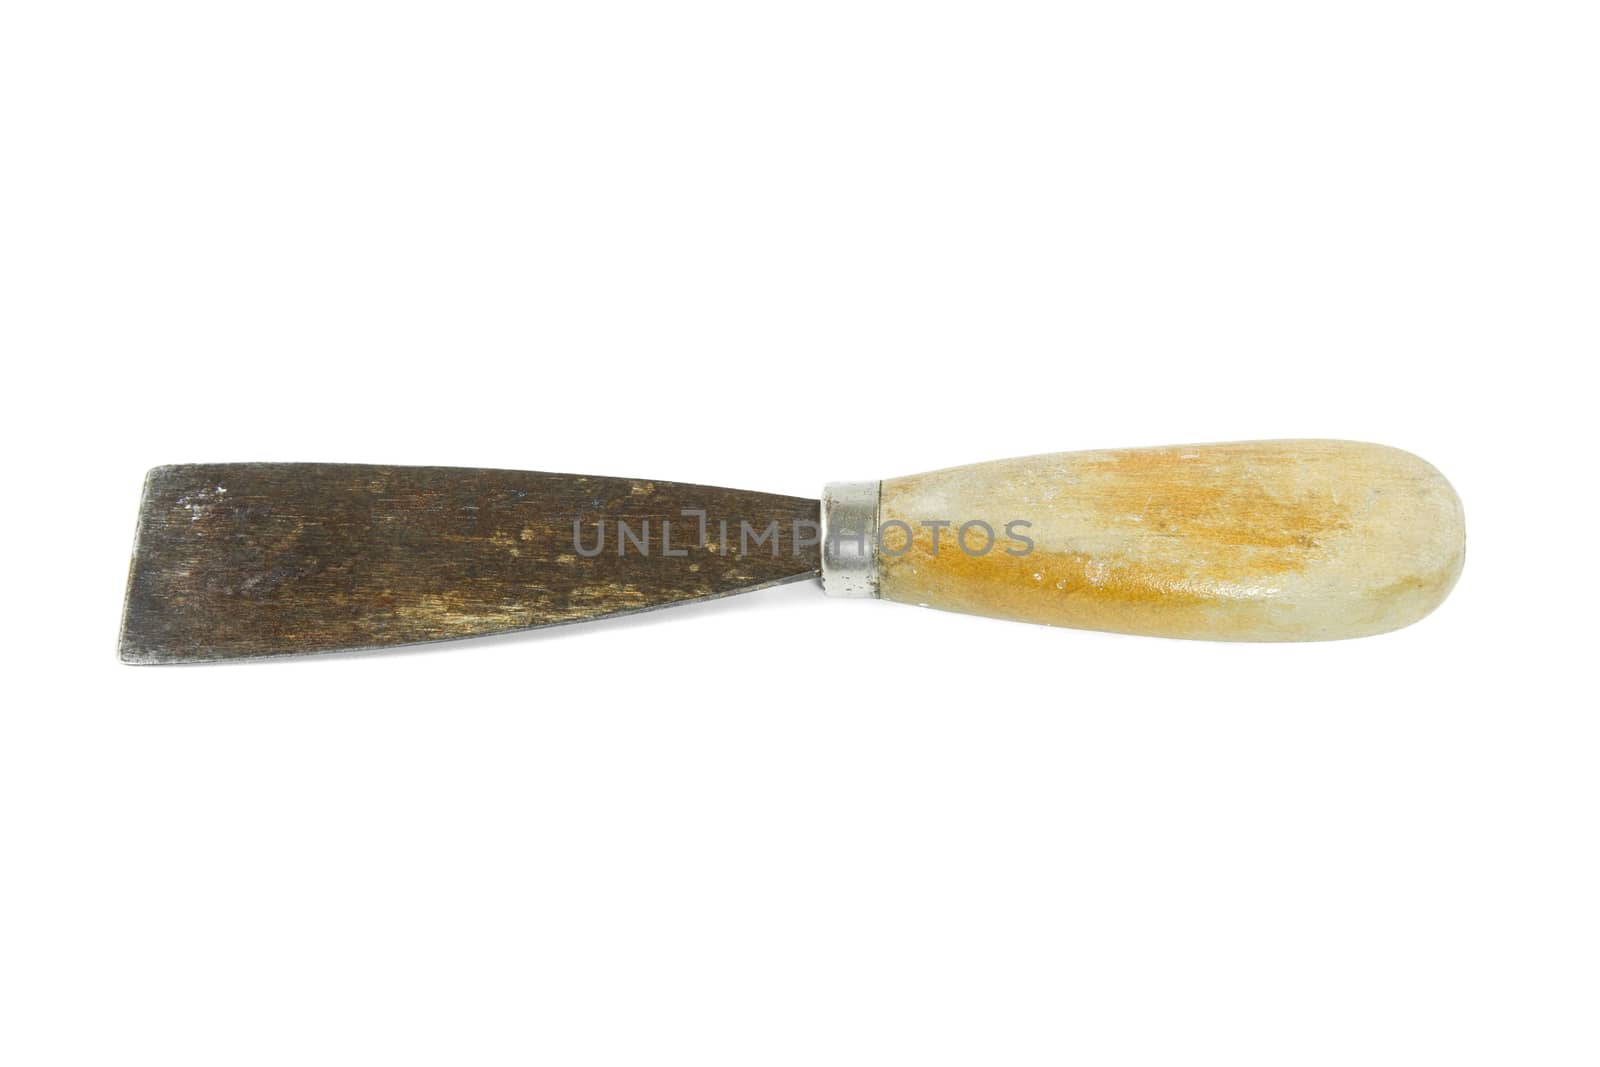 Trowel with wooden handle isolated on white background